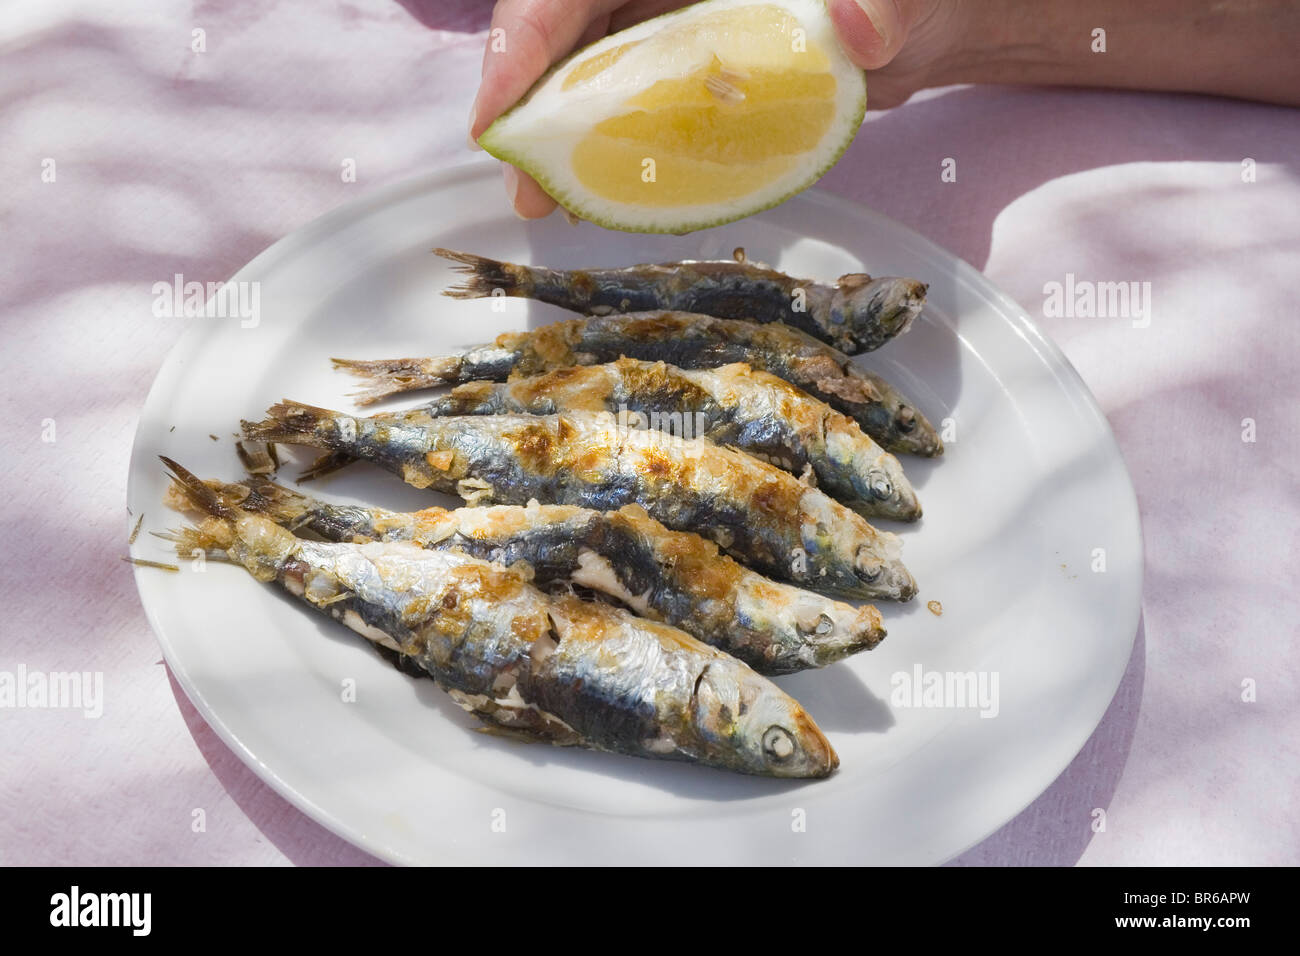 Plate of freshly barbecued sardines. Stock Photo